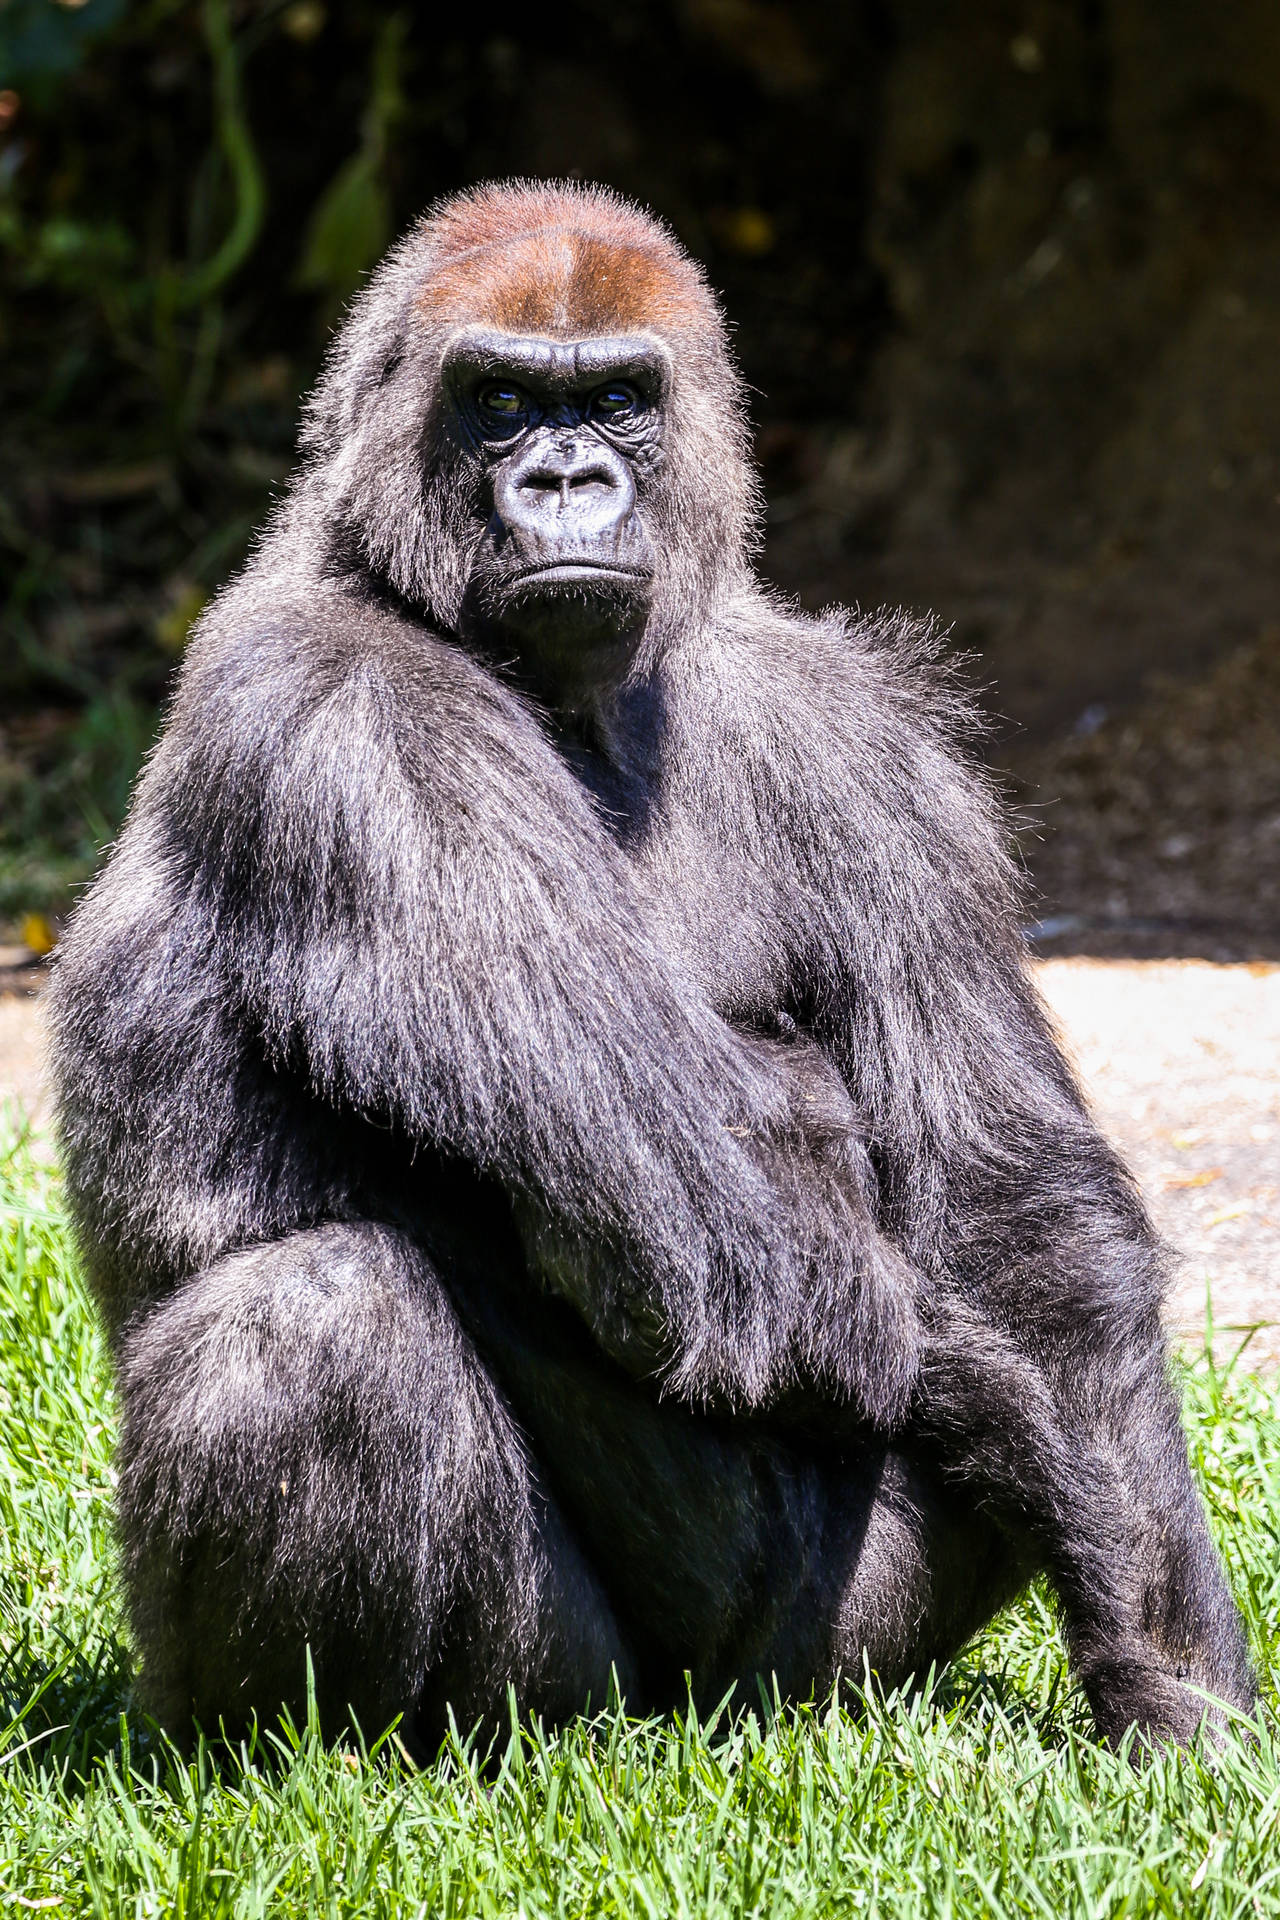 Gorilla 2517X3776 Wallpaper and Background Image